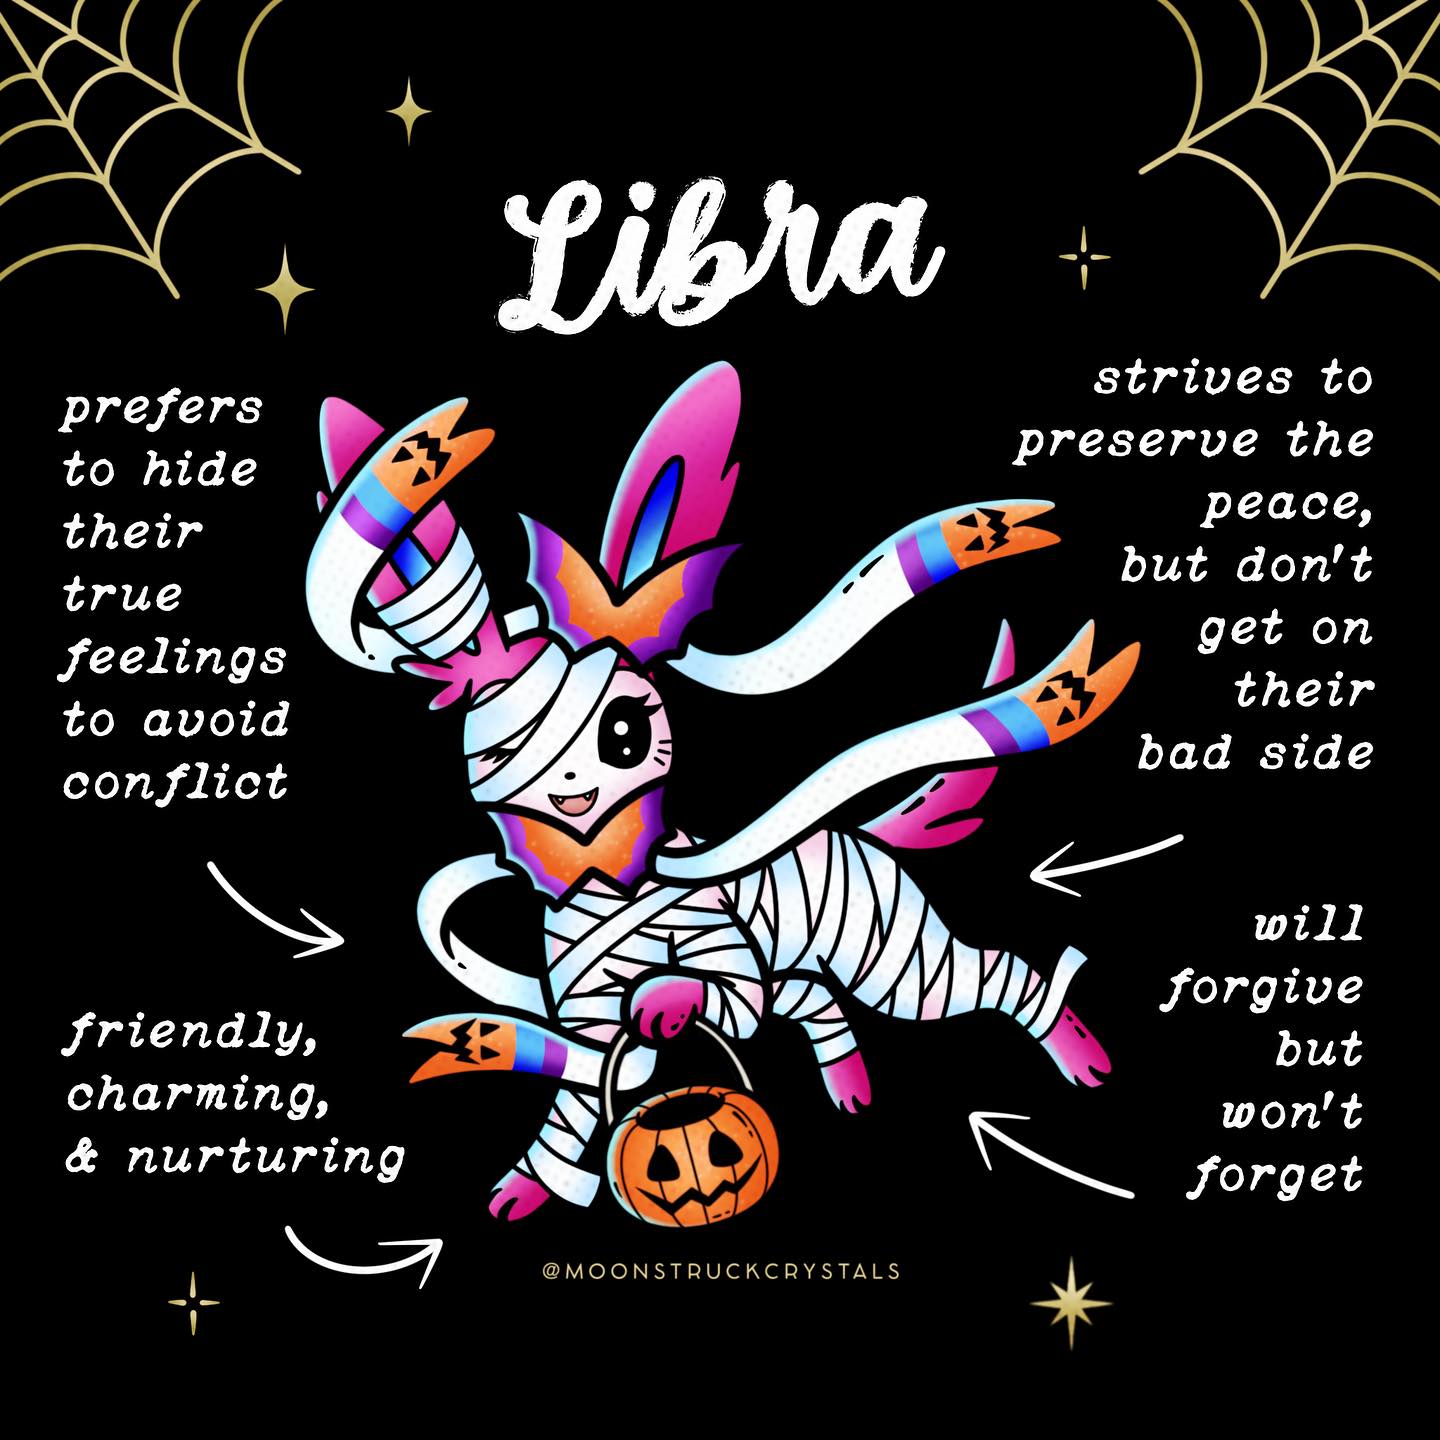 a sylveon dressed as a mummy for halloween, representing libra from a halloween-and-pokemon-themed zodiac image set by moon-struck-crystals. additional text around sylveon reads: prefers to hide their true feelings to avoid conflict. friendly, charming, and nuturing. strives to preserve the peace, but don't get on their bad side. will forgive but won't forget.